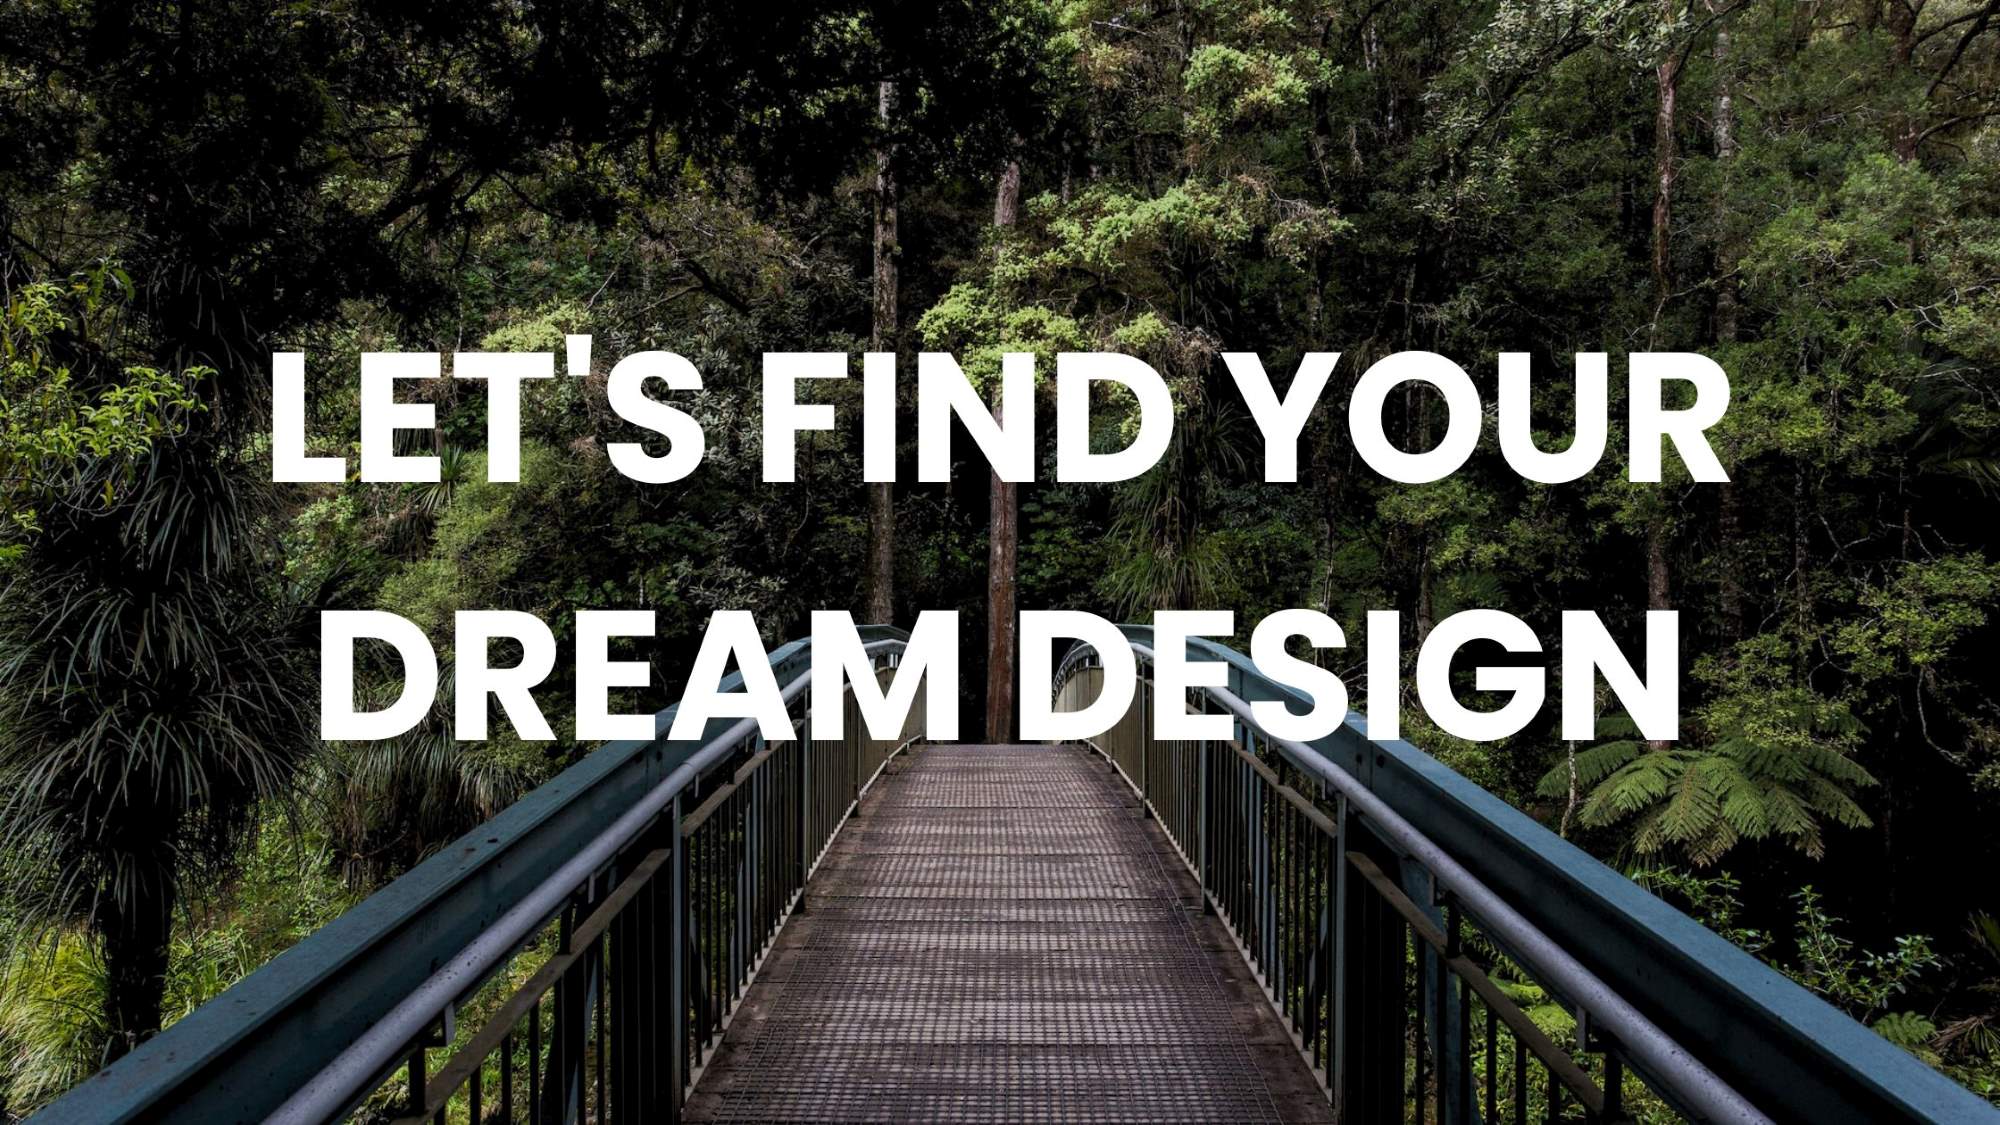 First-person view on arched steel bridge in rainforest with "LET'S FIND YOUR DREAM DESIGN" text